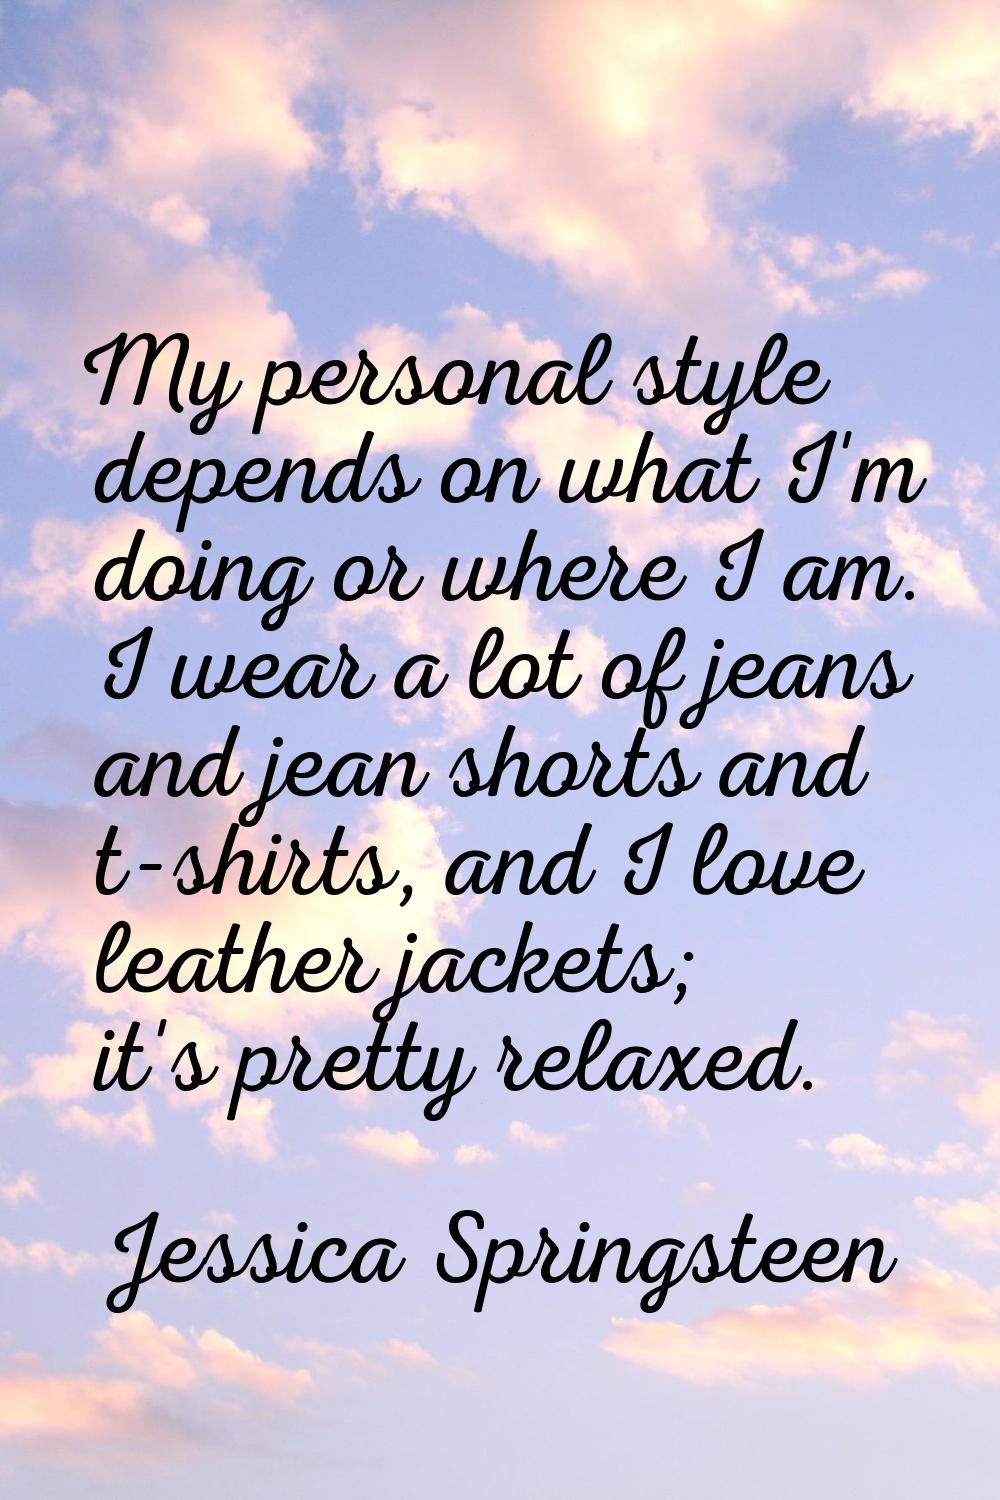 My personal style depends on what I'm doing or where I am. I wear a lot of jeans and jean shorts an